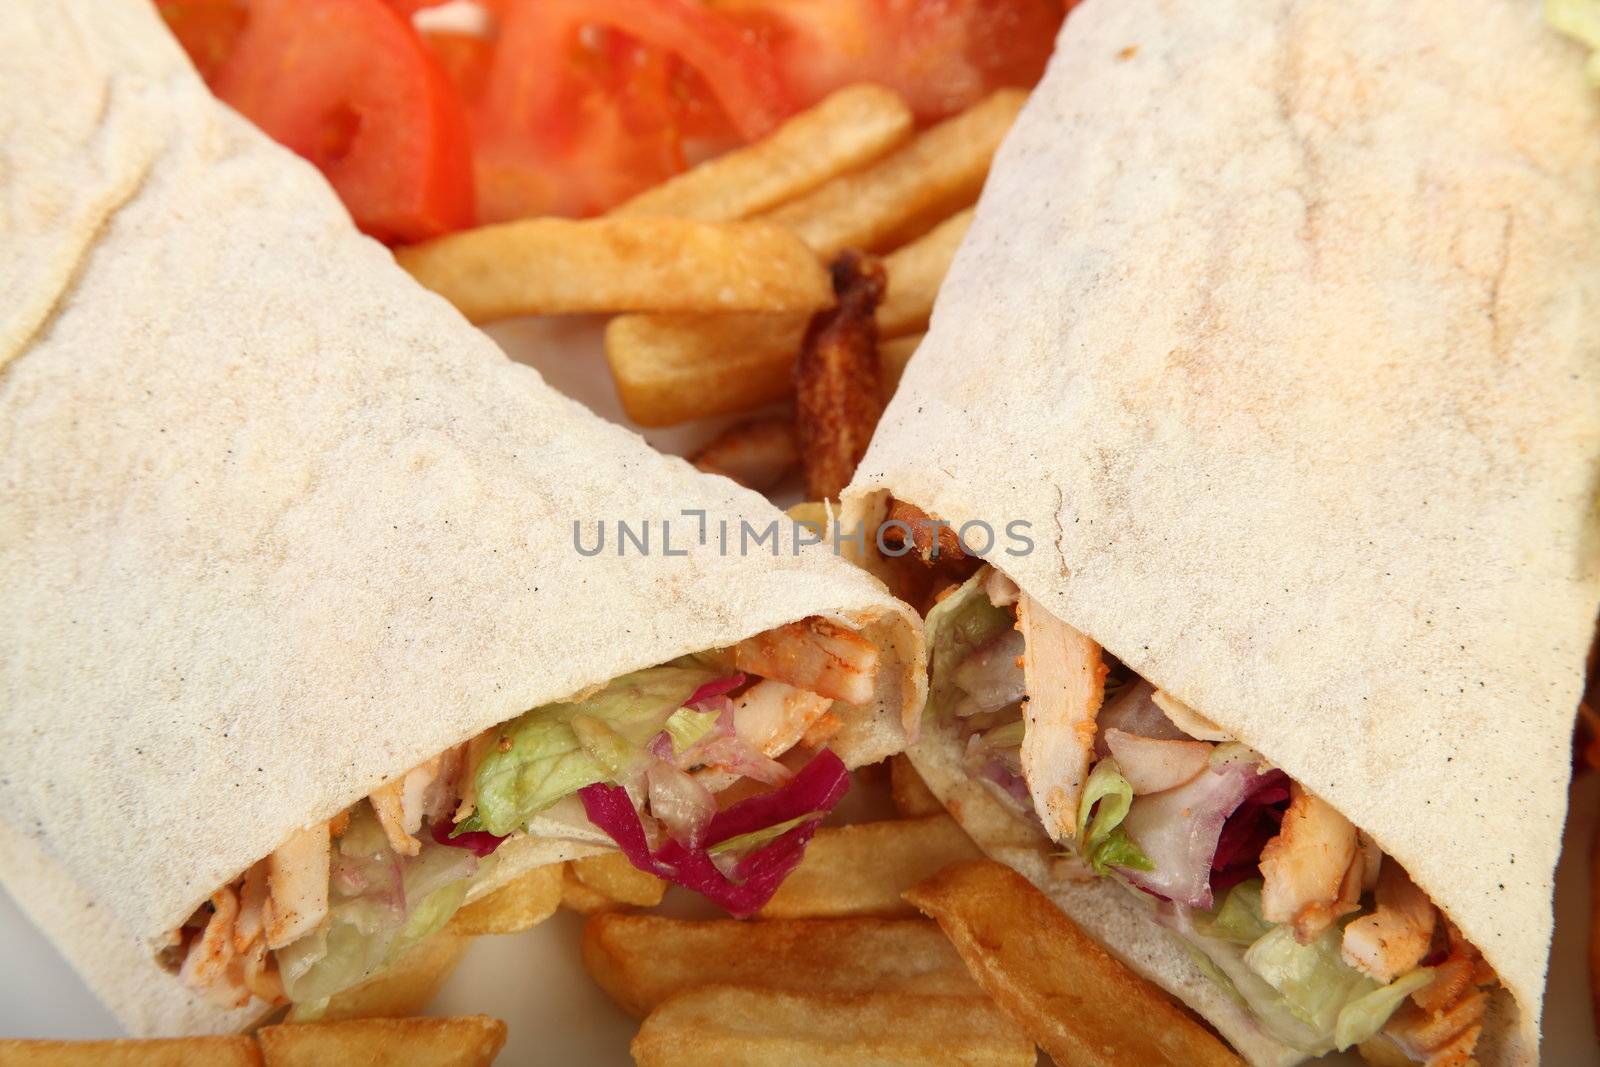 Chicken doner served with salad and french fries